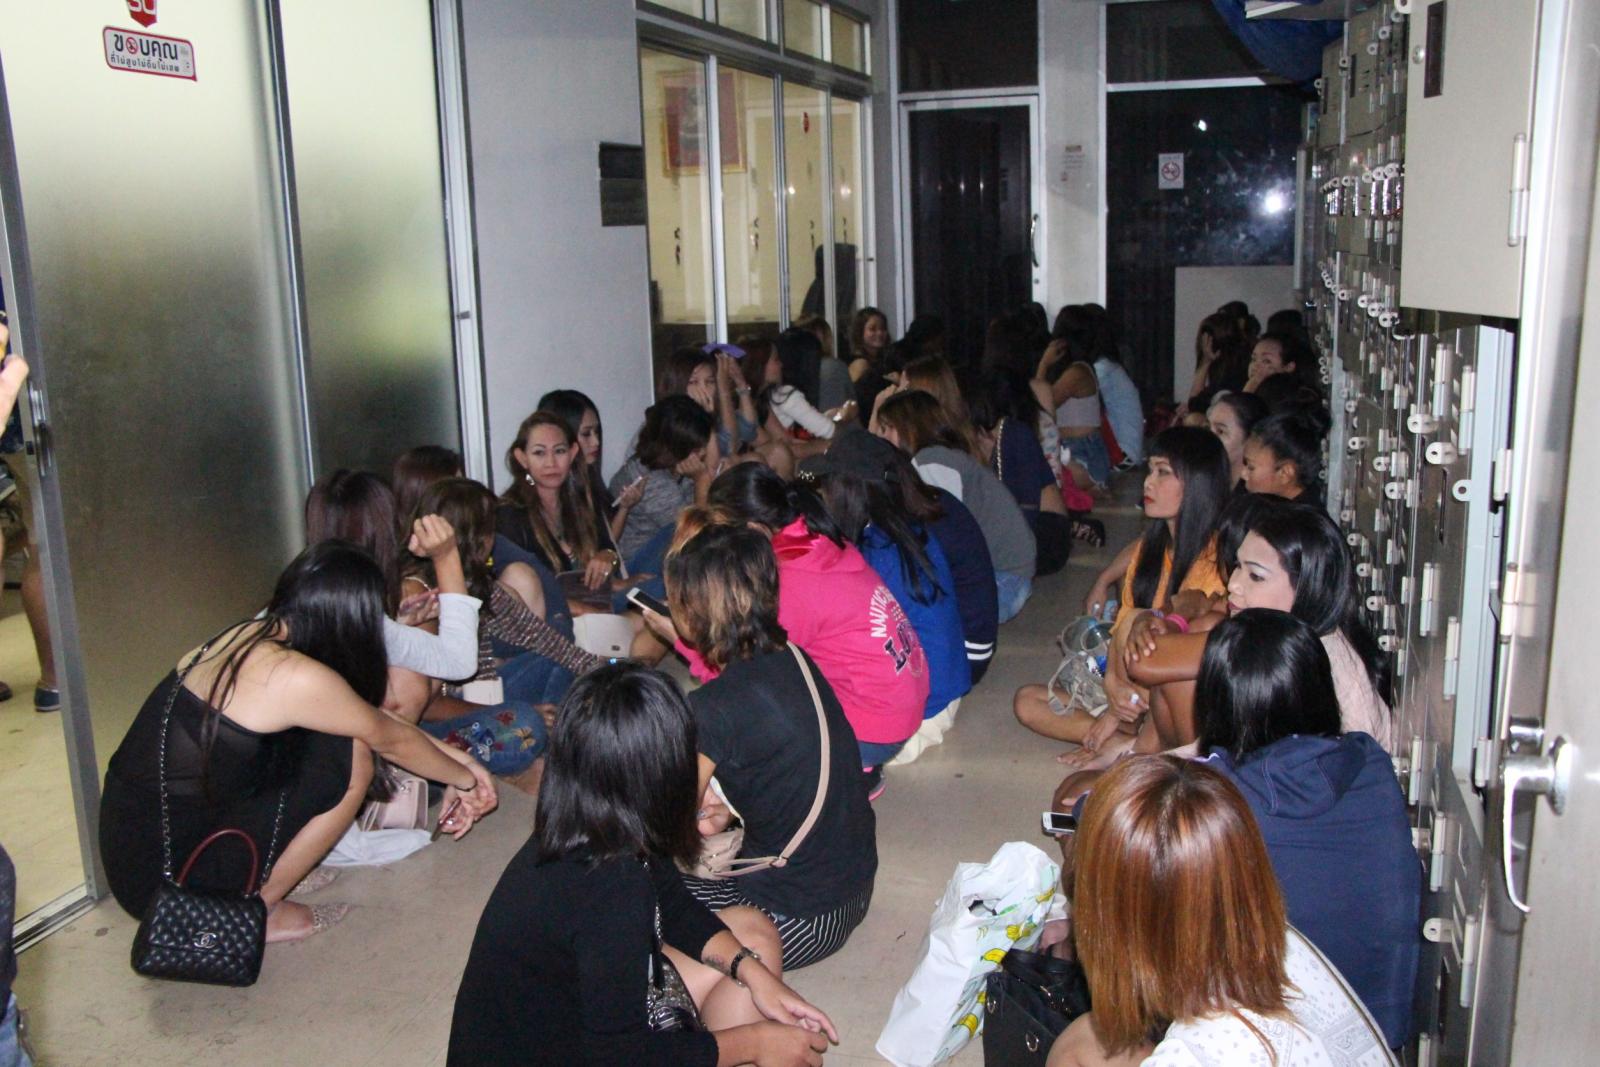 Pattaya Beach Road Prostitutes Rounded Up Ahead Of International Boat Show